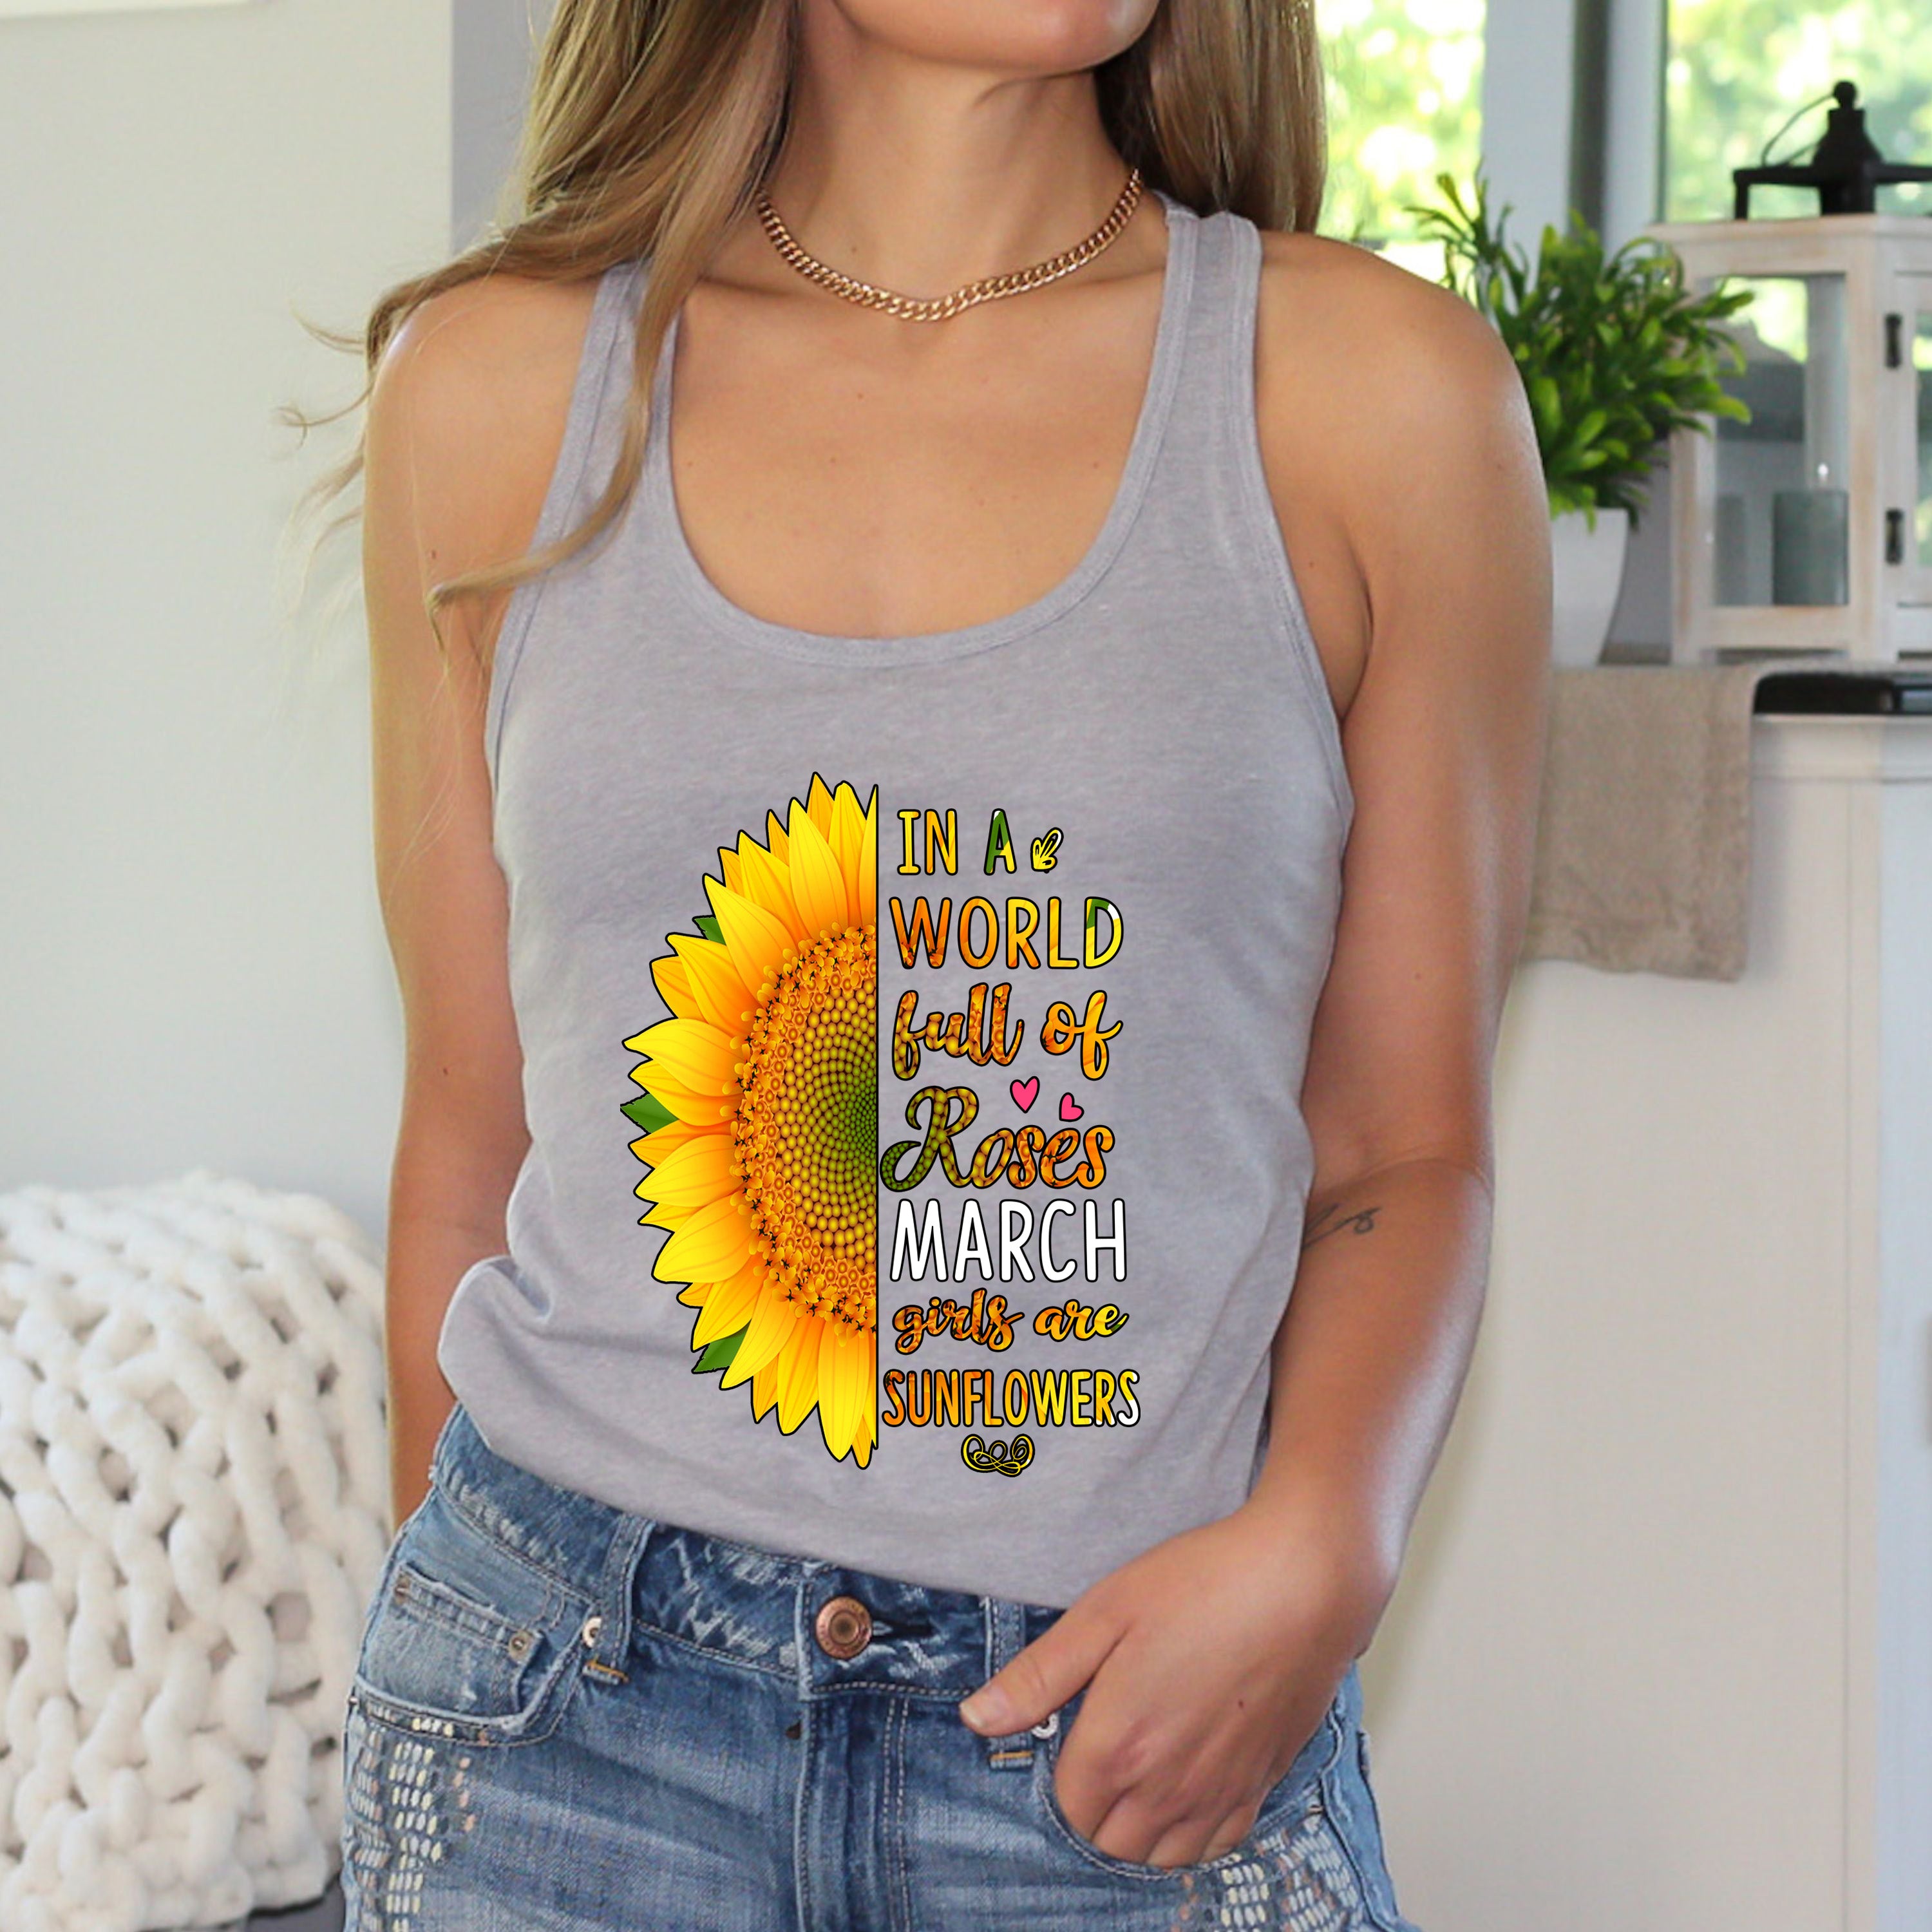 "In a world full of roses March girls are Sunflowers"